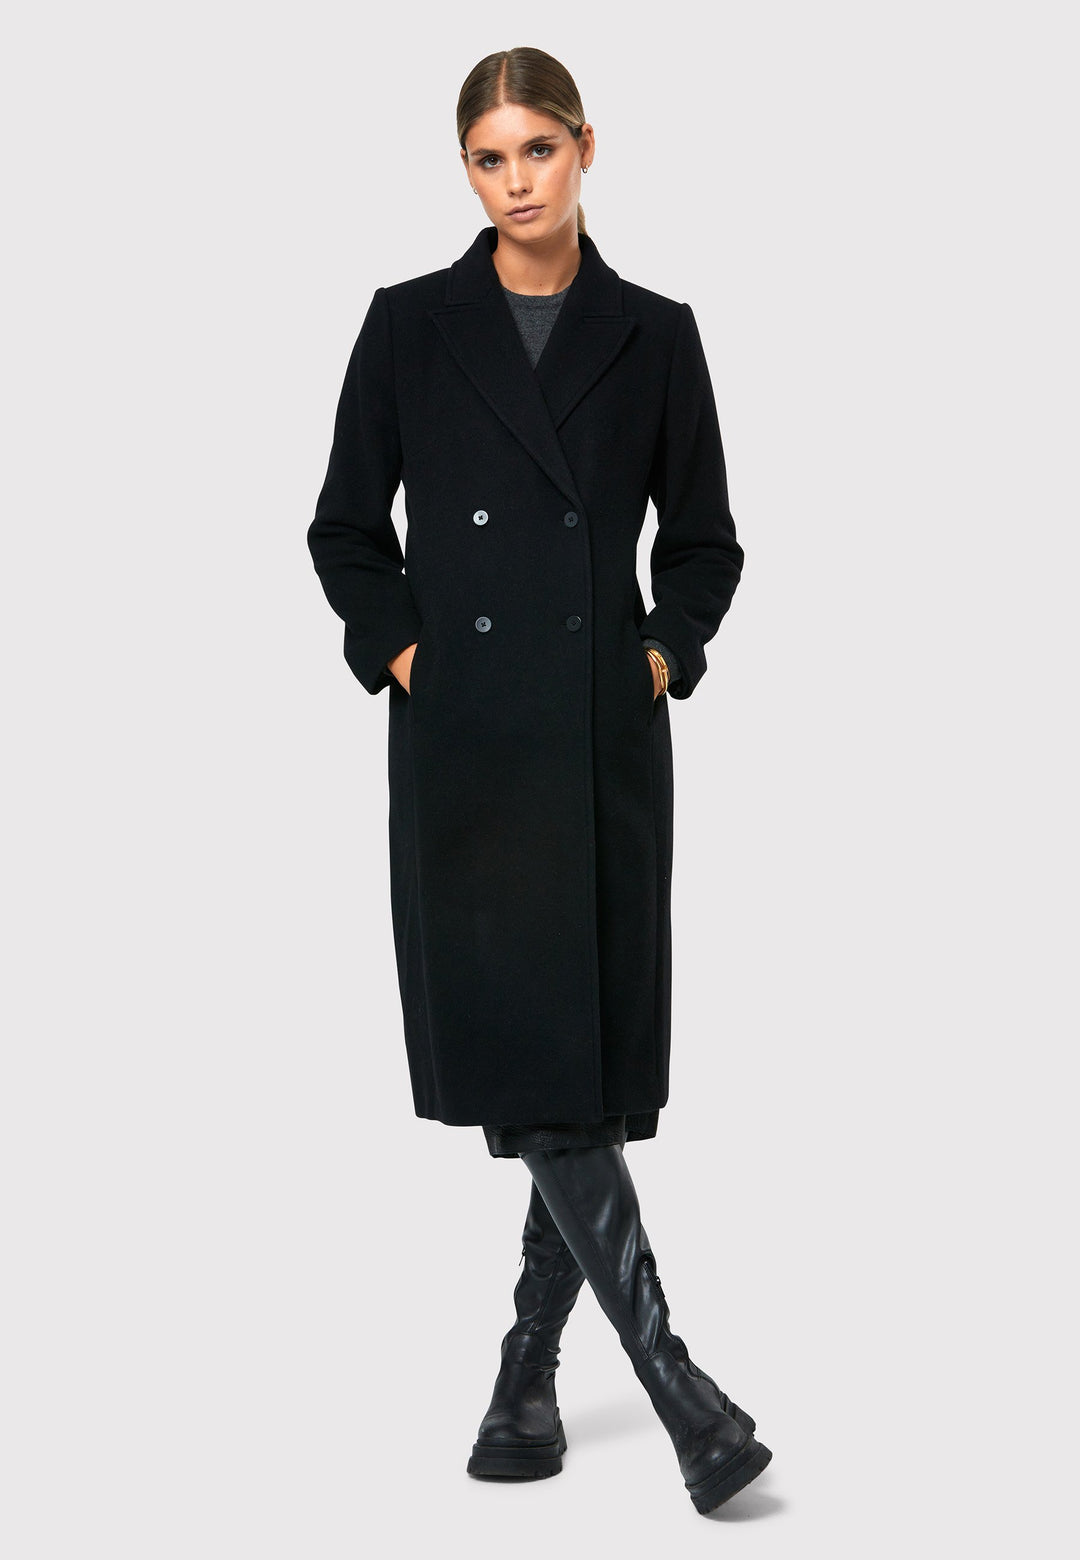 Introducing the Beryl Black Coat, your ultimate companion for warmth and style this winter season. This exquisite coat features a classic double-breasted silhouette with a four-button fastening and a sleek collar and revere detail, inspired by men's tailoring. Crafted from a cozy melton fabric, it falls below the knee, enveloping you in both comfort and sophistication. Stay fashionable and cozy with the Beryl Black Coat, a must-have addition to your winter wardrobe.